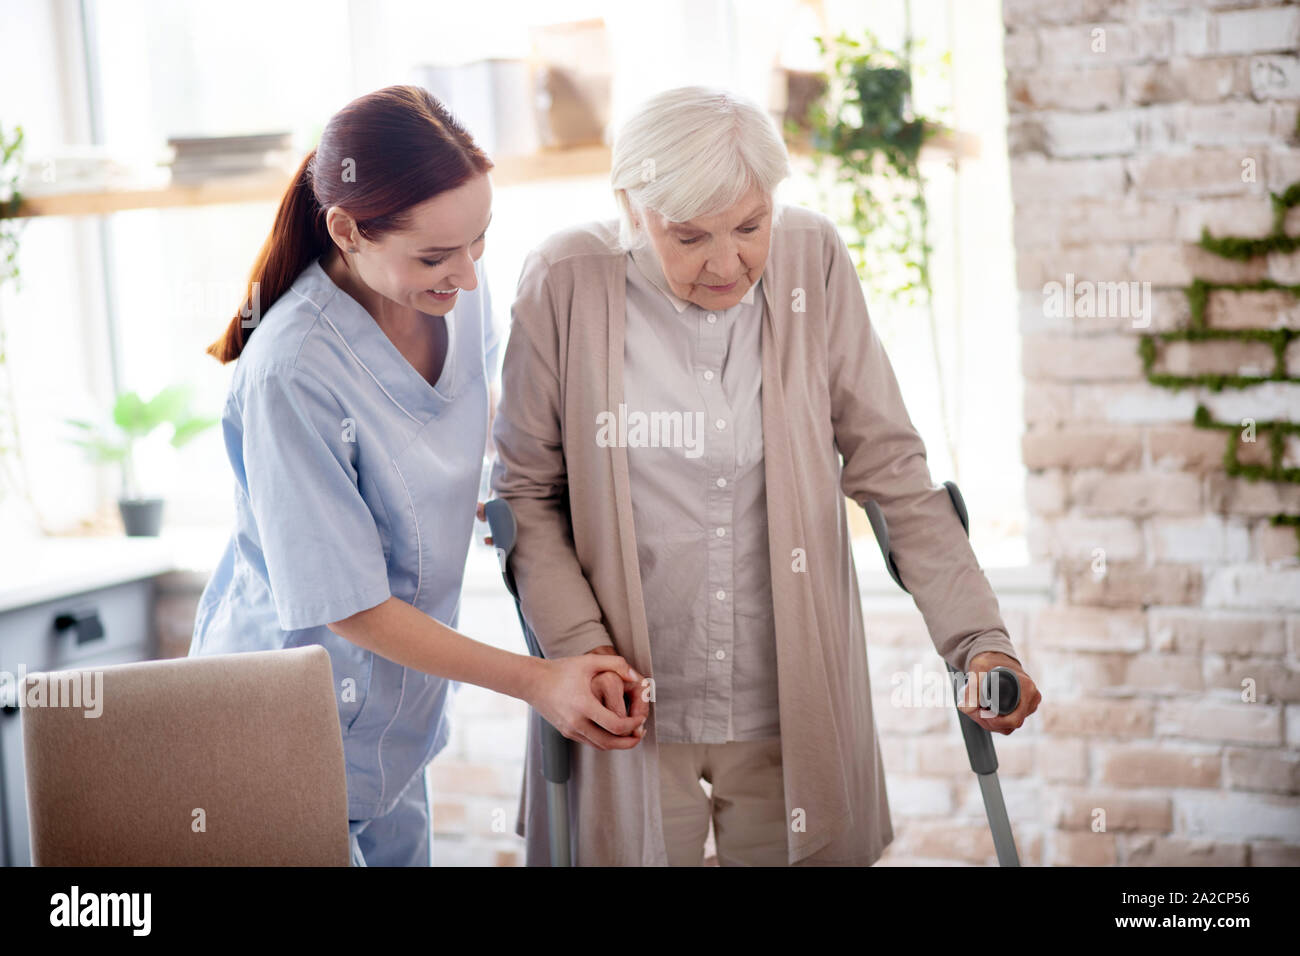 Helpful caregiver assisting woman with crutches Stock Photo